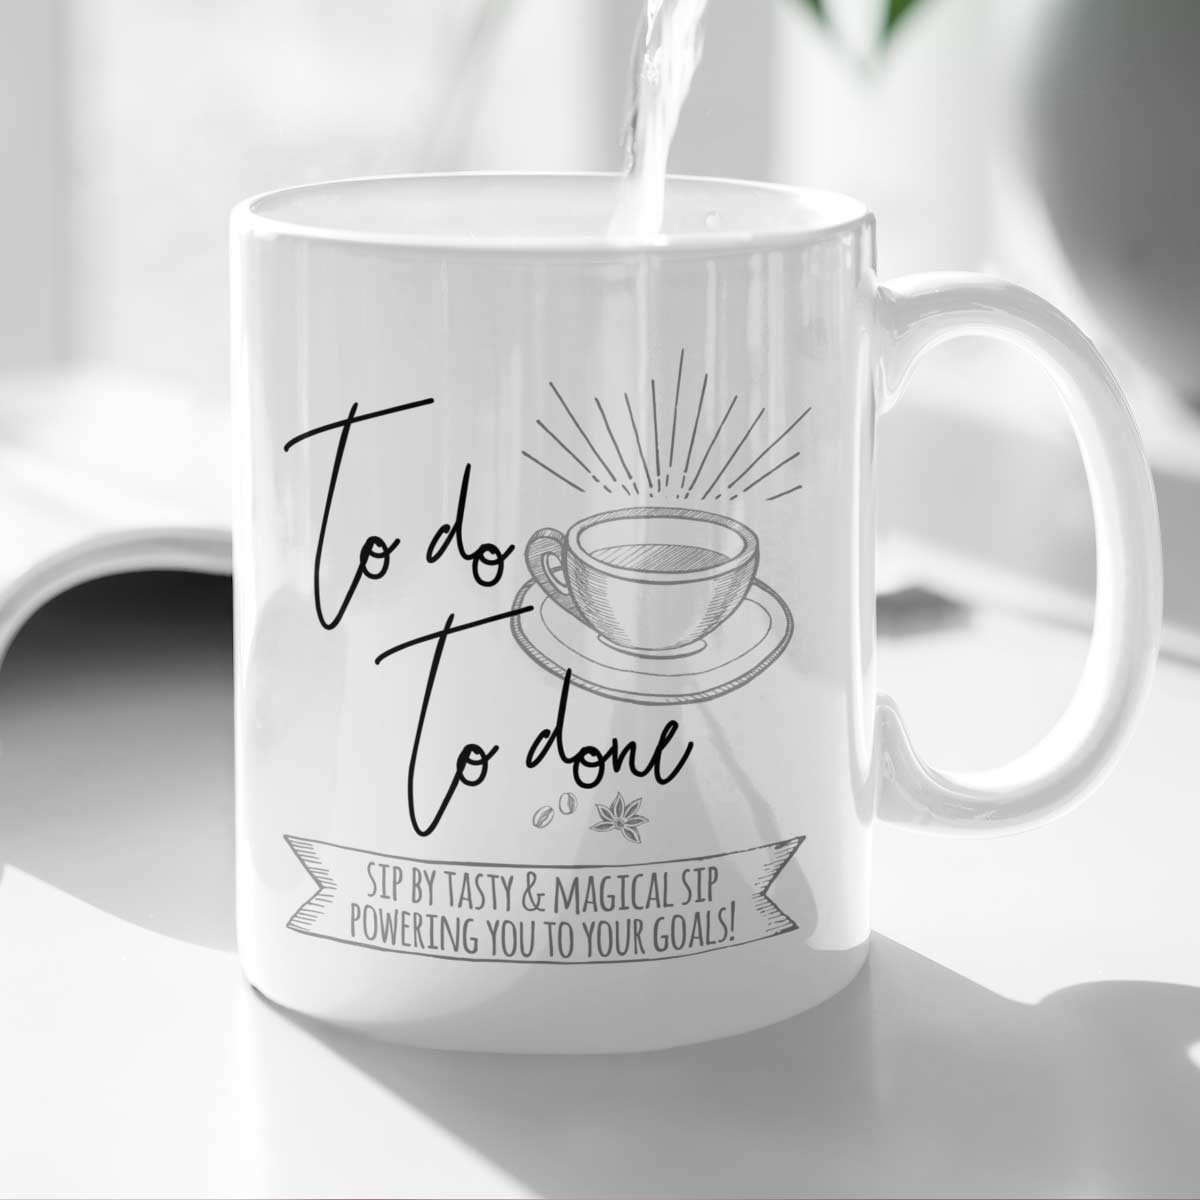 Sip By Tasty And Magical Sip 11 oz. White Mug